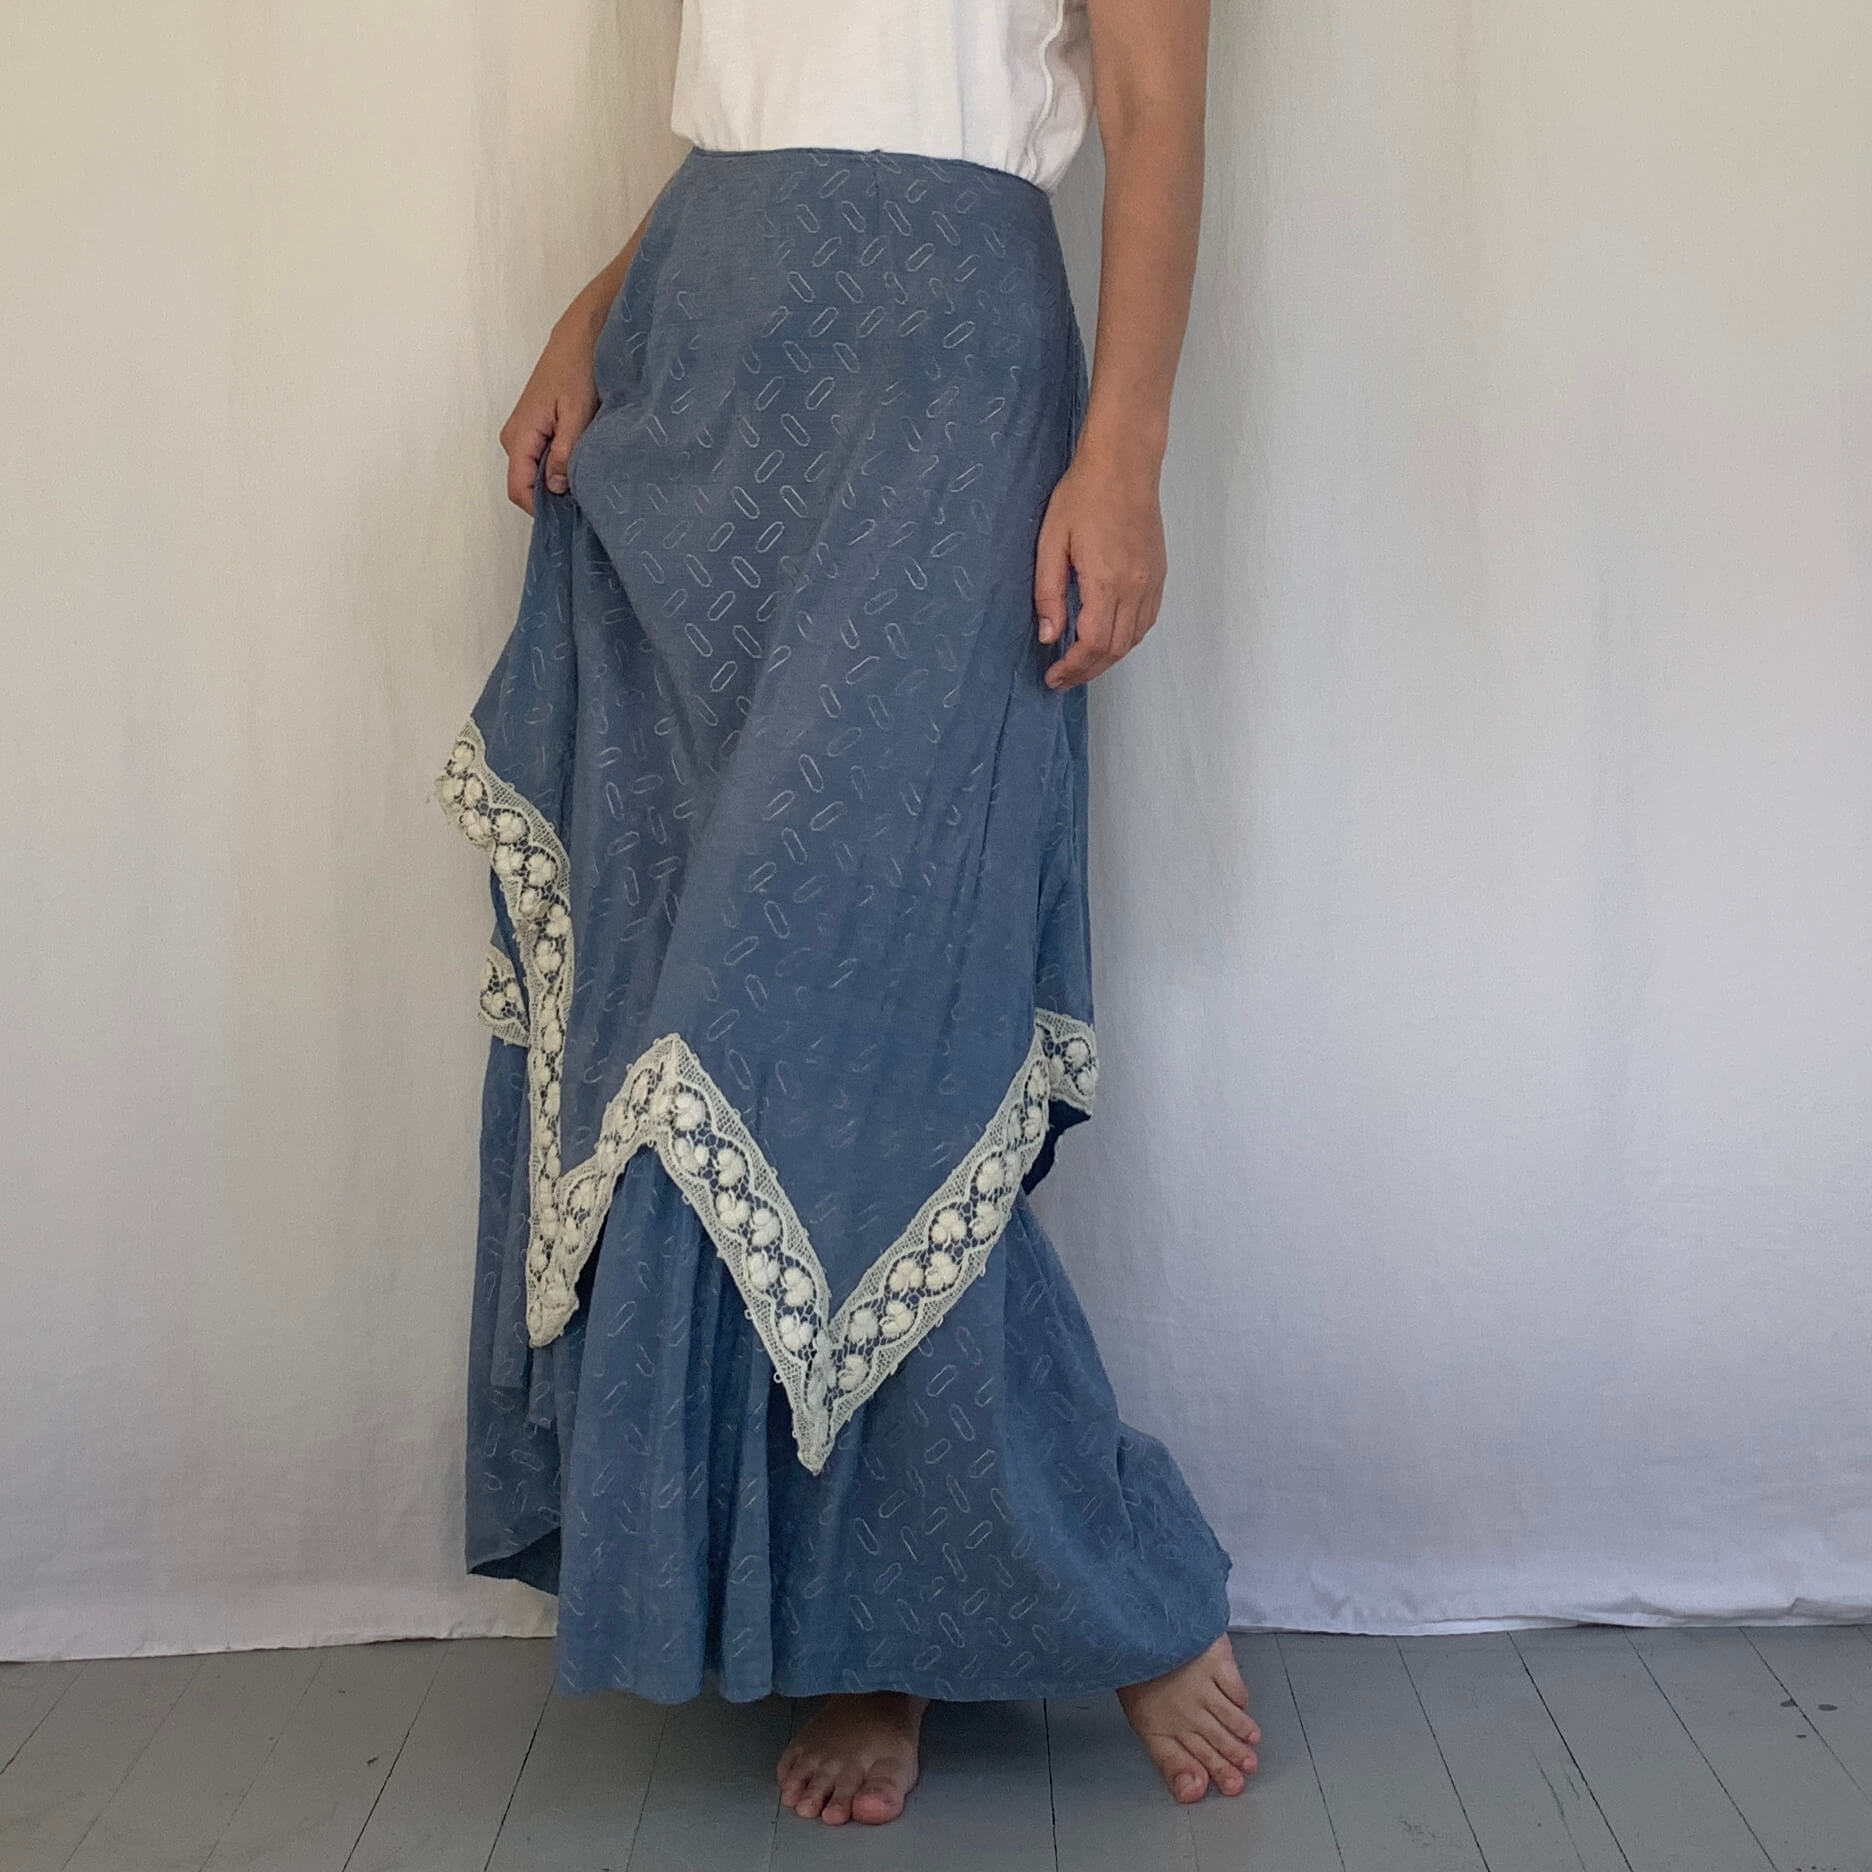 Edwardian Skirt in blue with lace